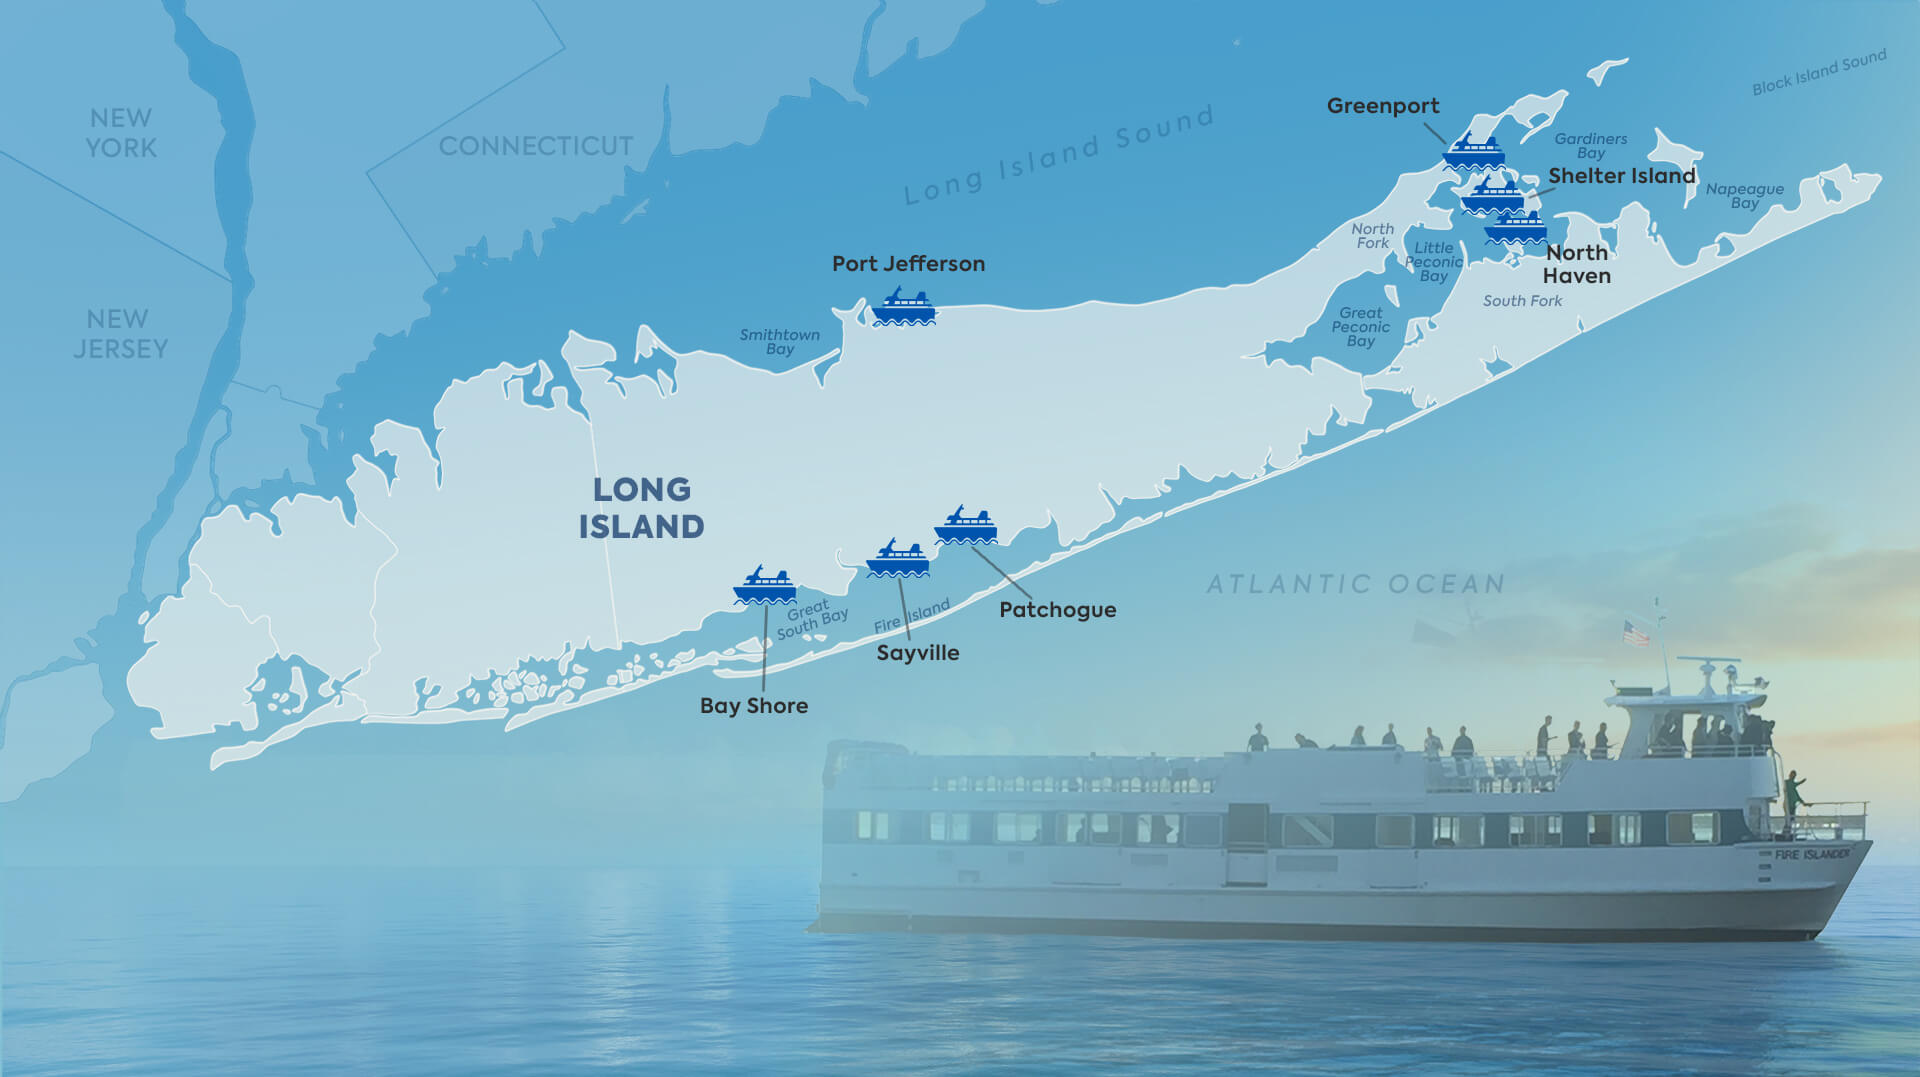 Map showing ferry ports in Long Island, New York